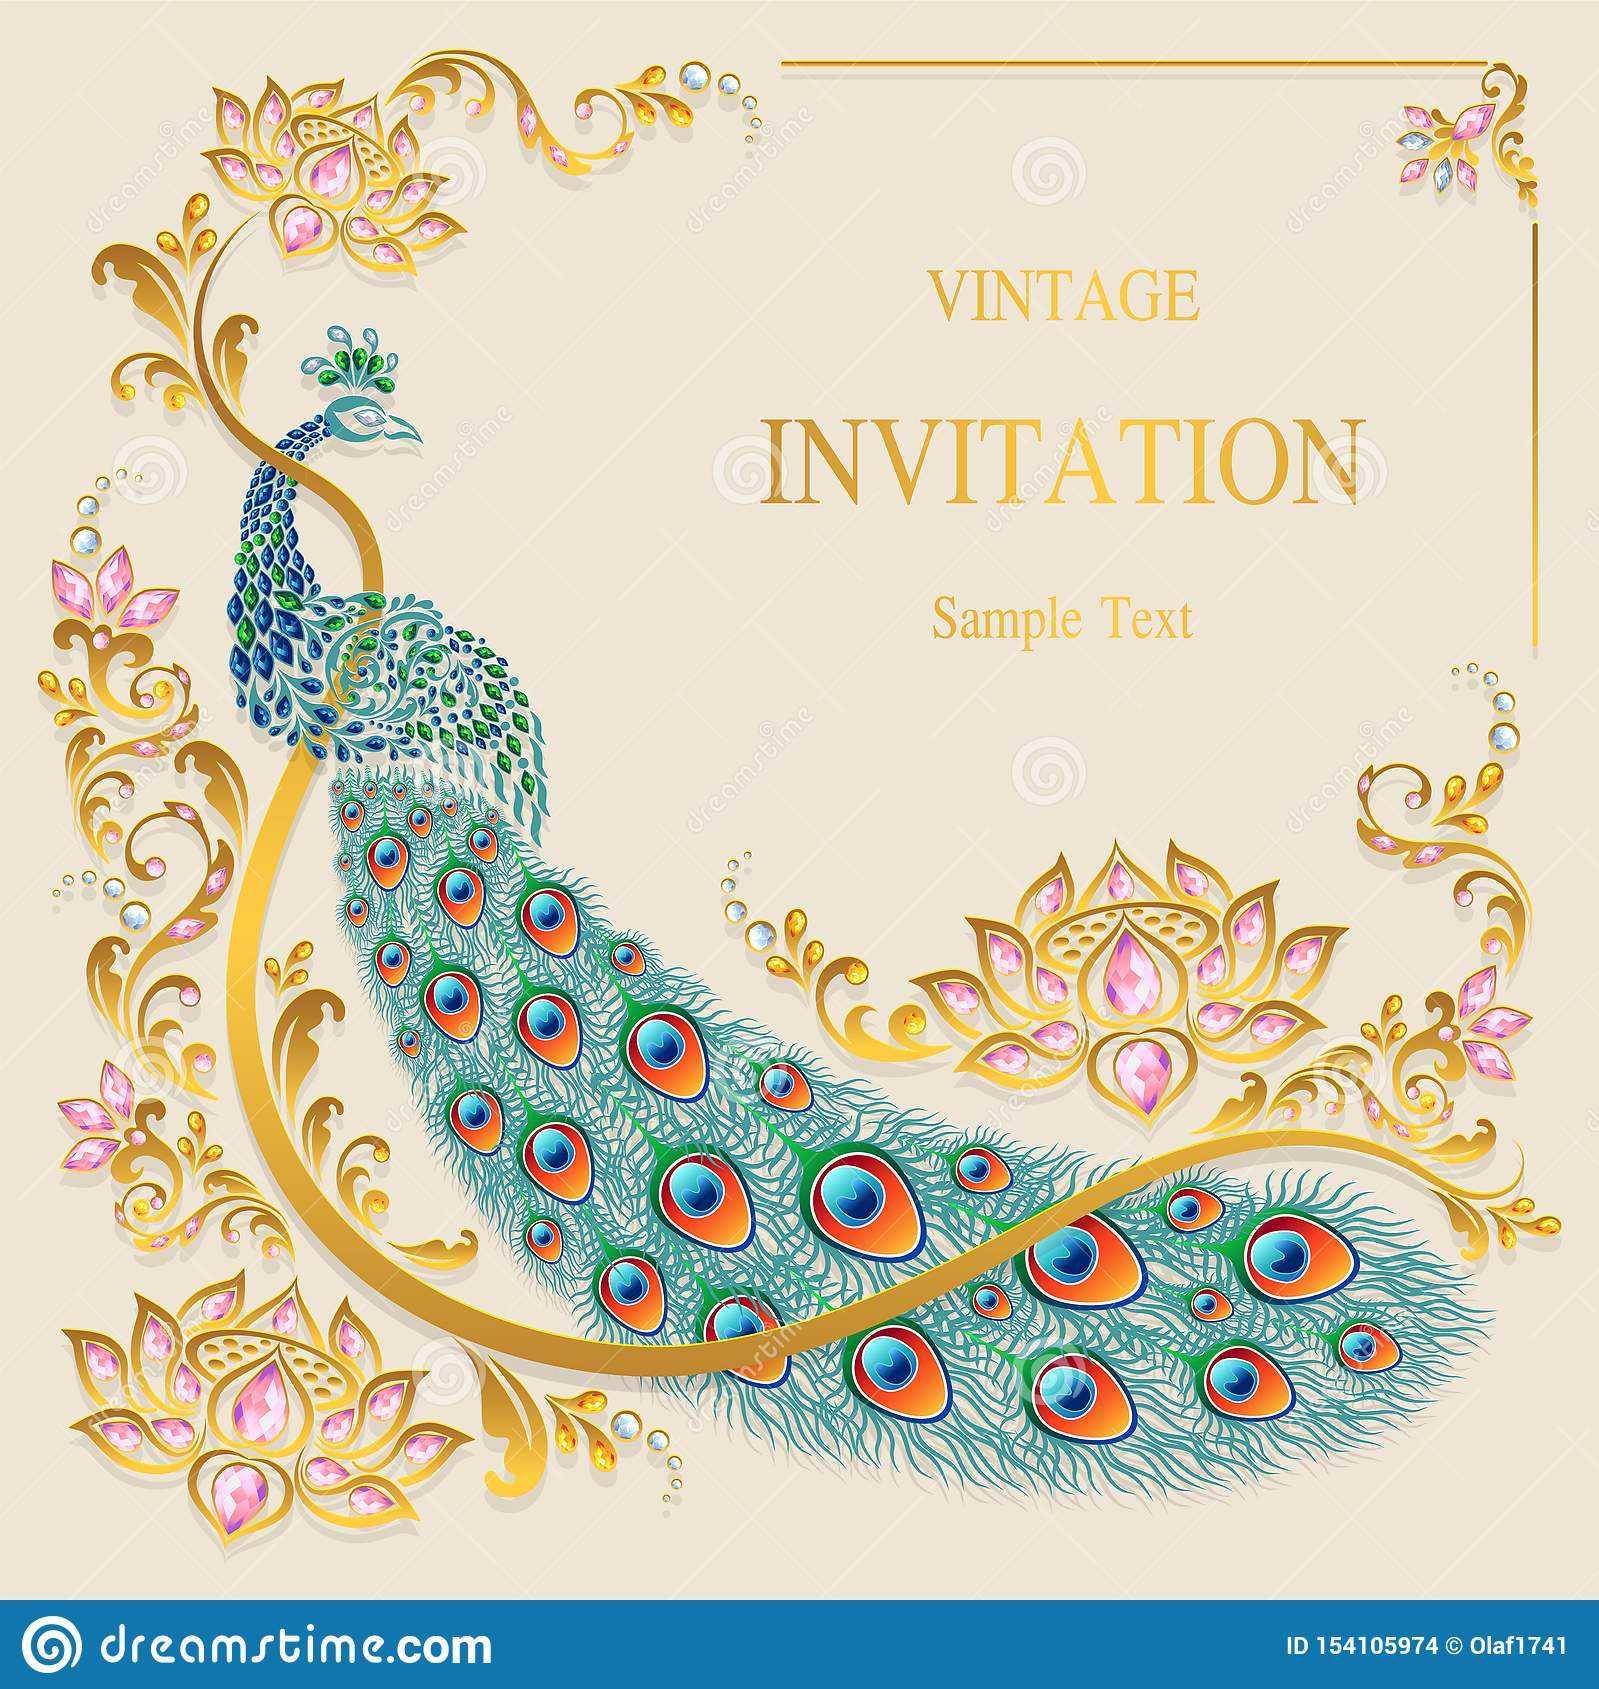 Indian Wedding Invitation Card Templates . Stock Vector Intended For Indian Wedding Cards Design Templates